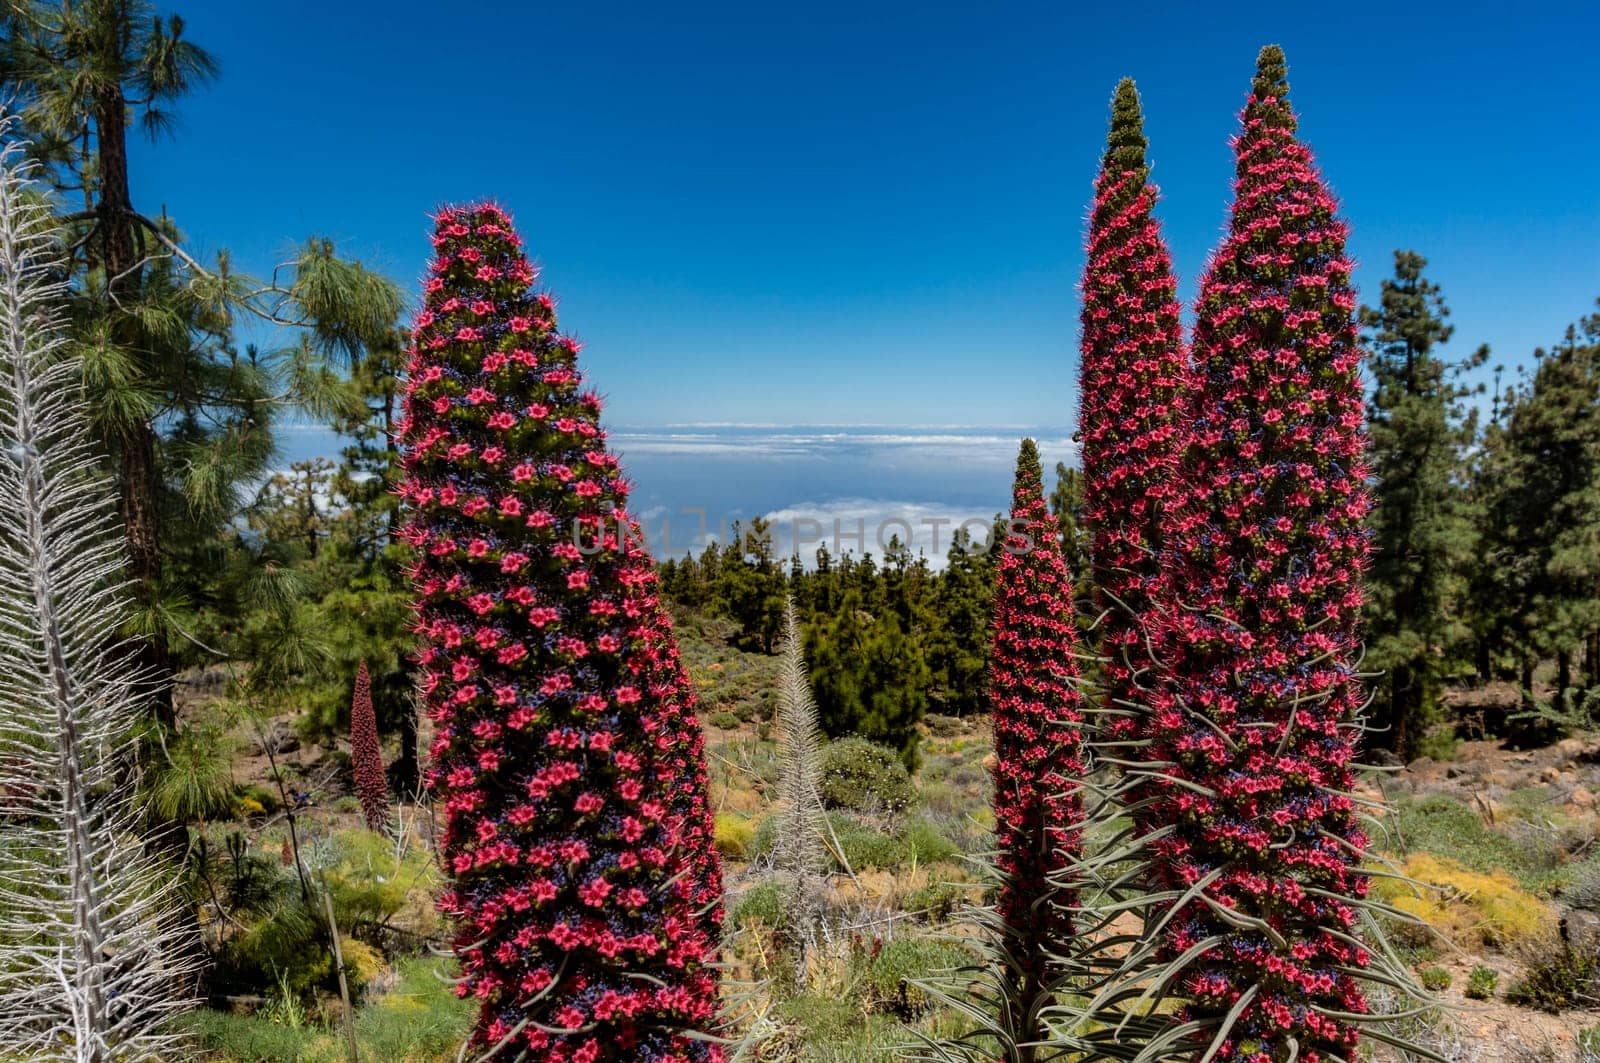 Red Flowers of tajinaste rojo among Canary Island pine trees forest. Endemics to the Canary islands. Echium wildpretii, tower of jewels, red bugloss, Tenerife bugloss